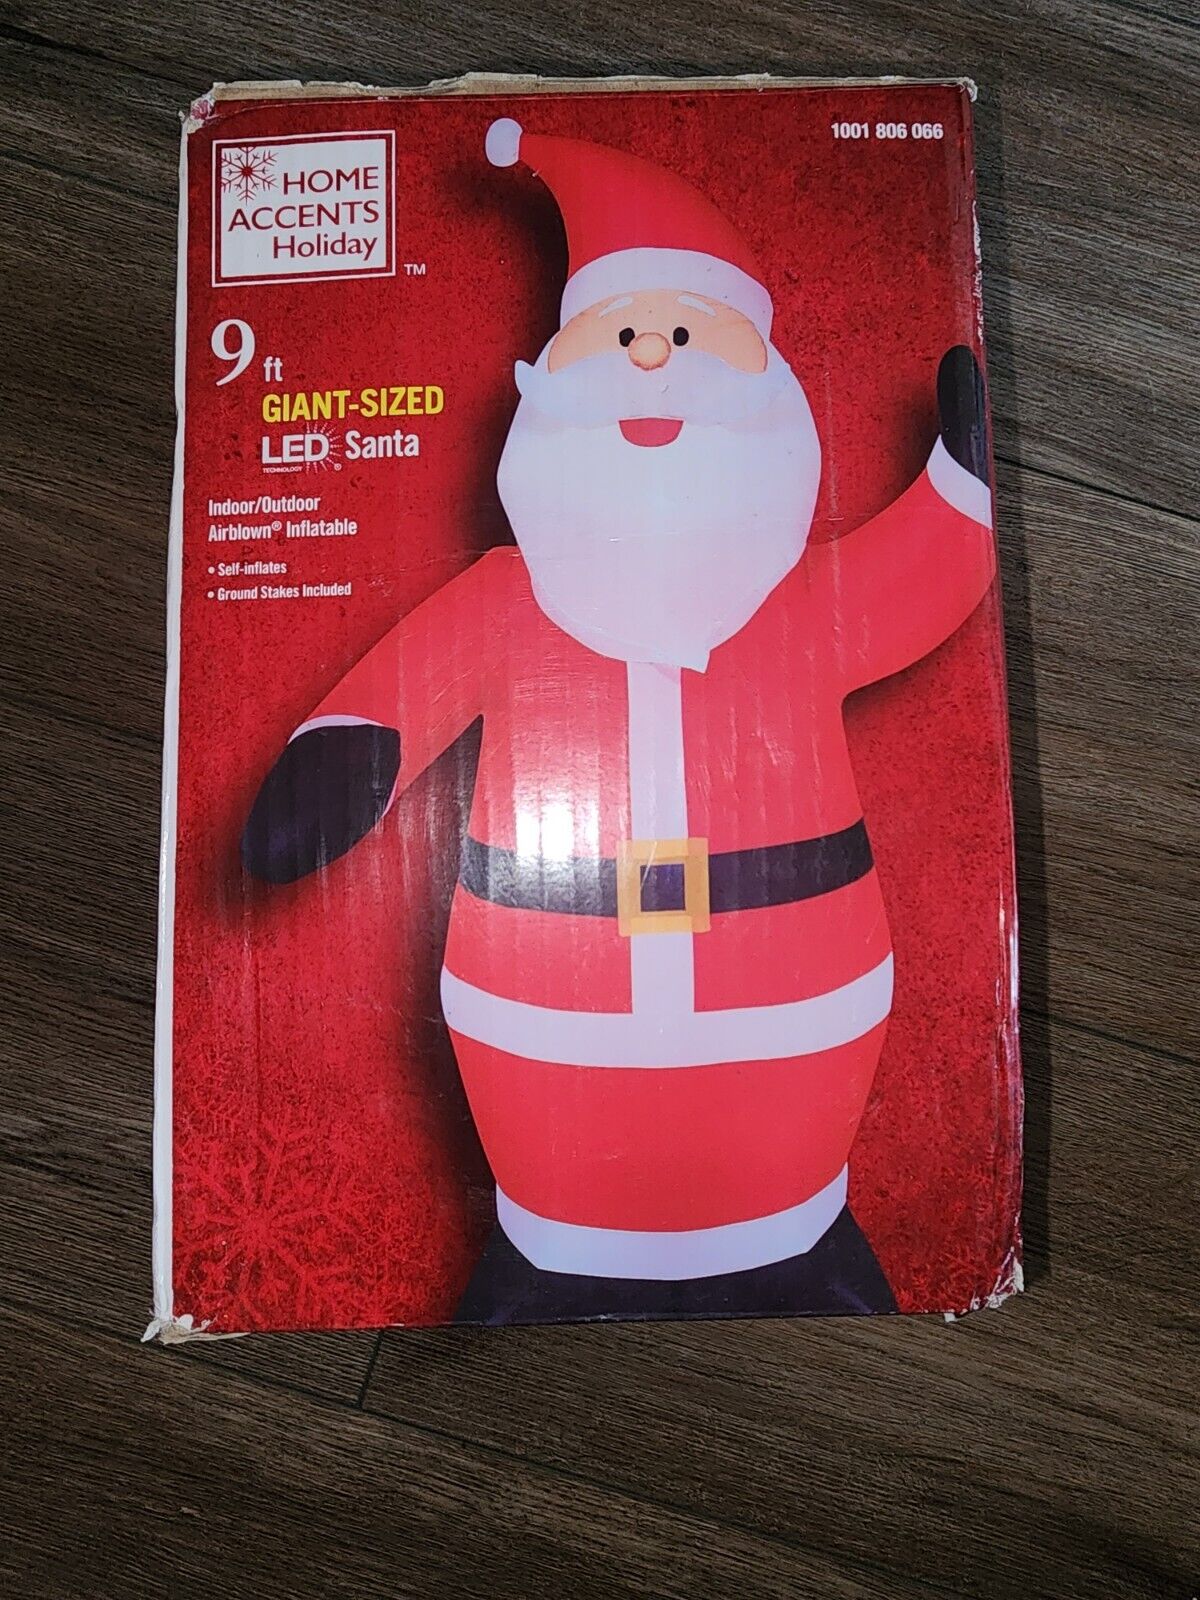 Home Accents 9 Ft Giant-Sized LED Santa  Airblown Inflatable